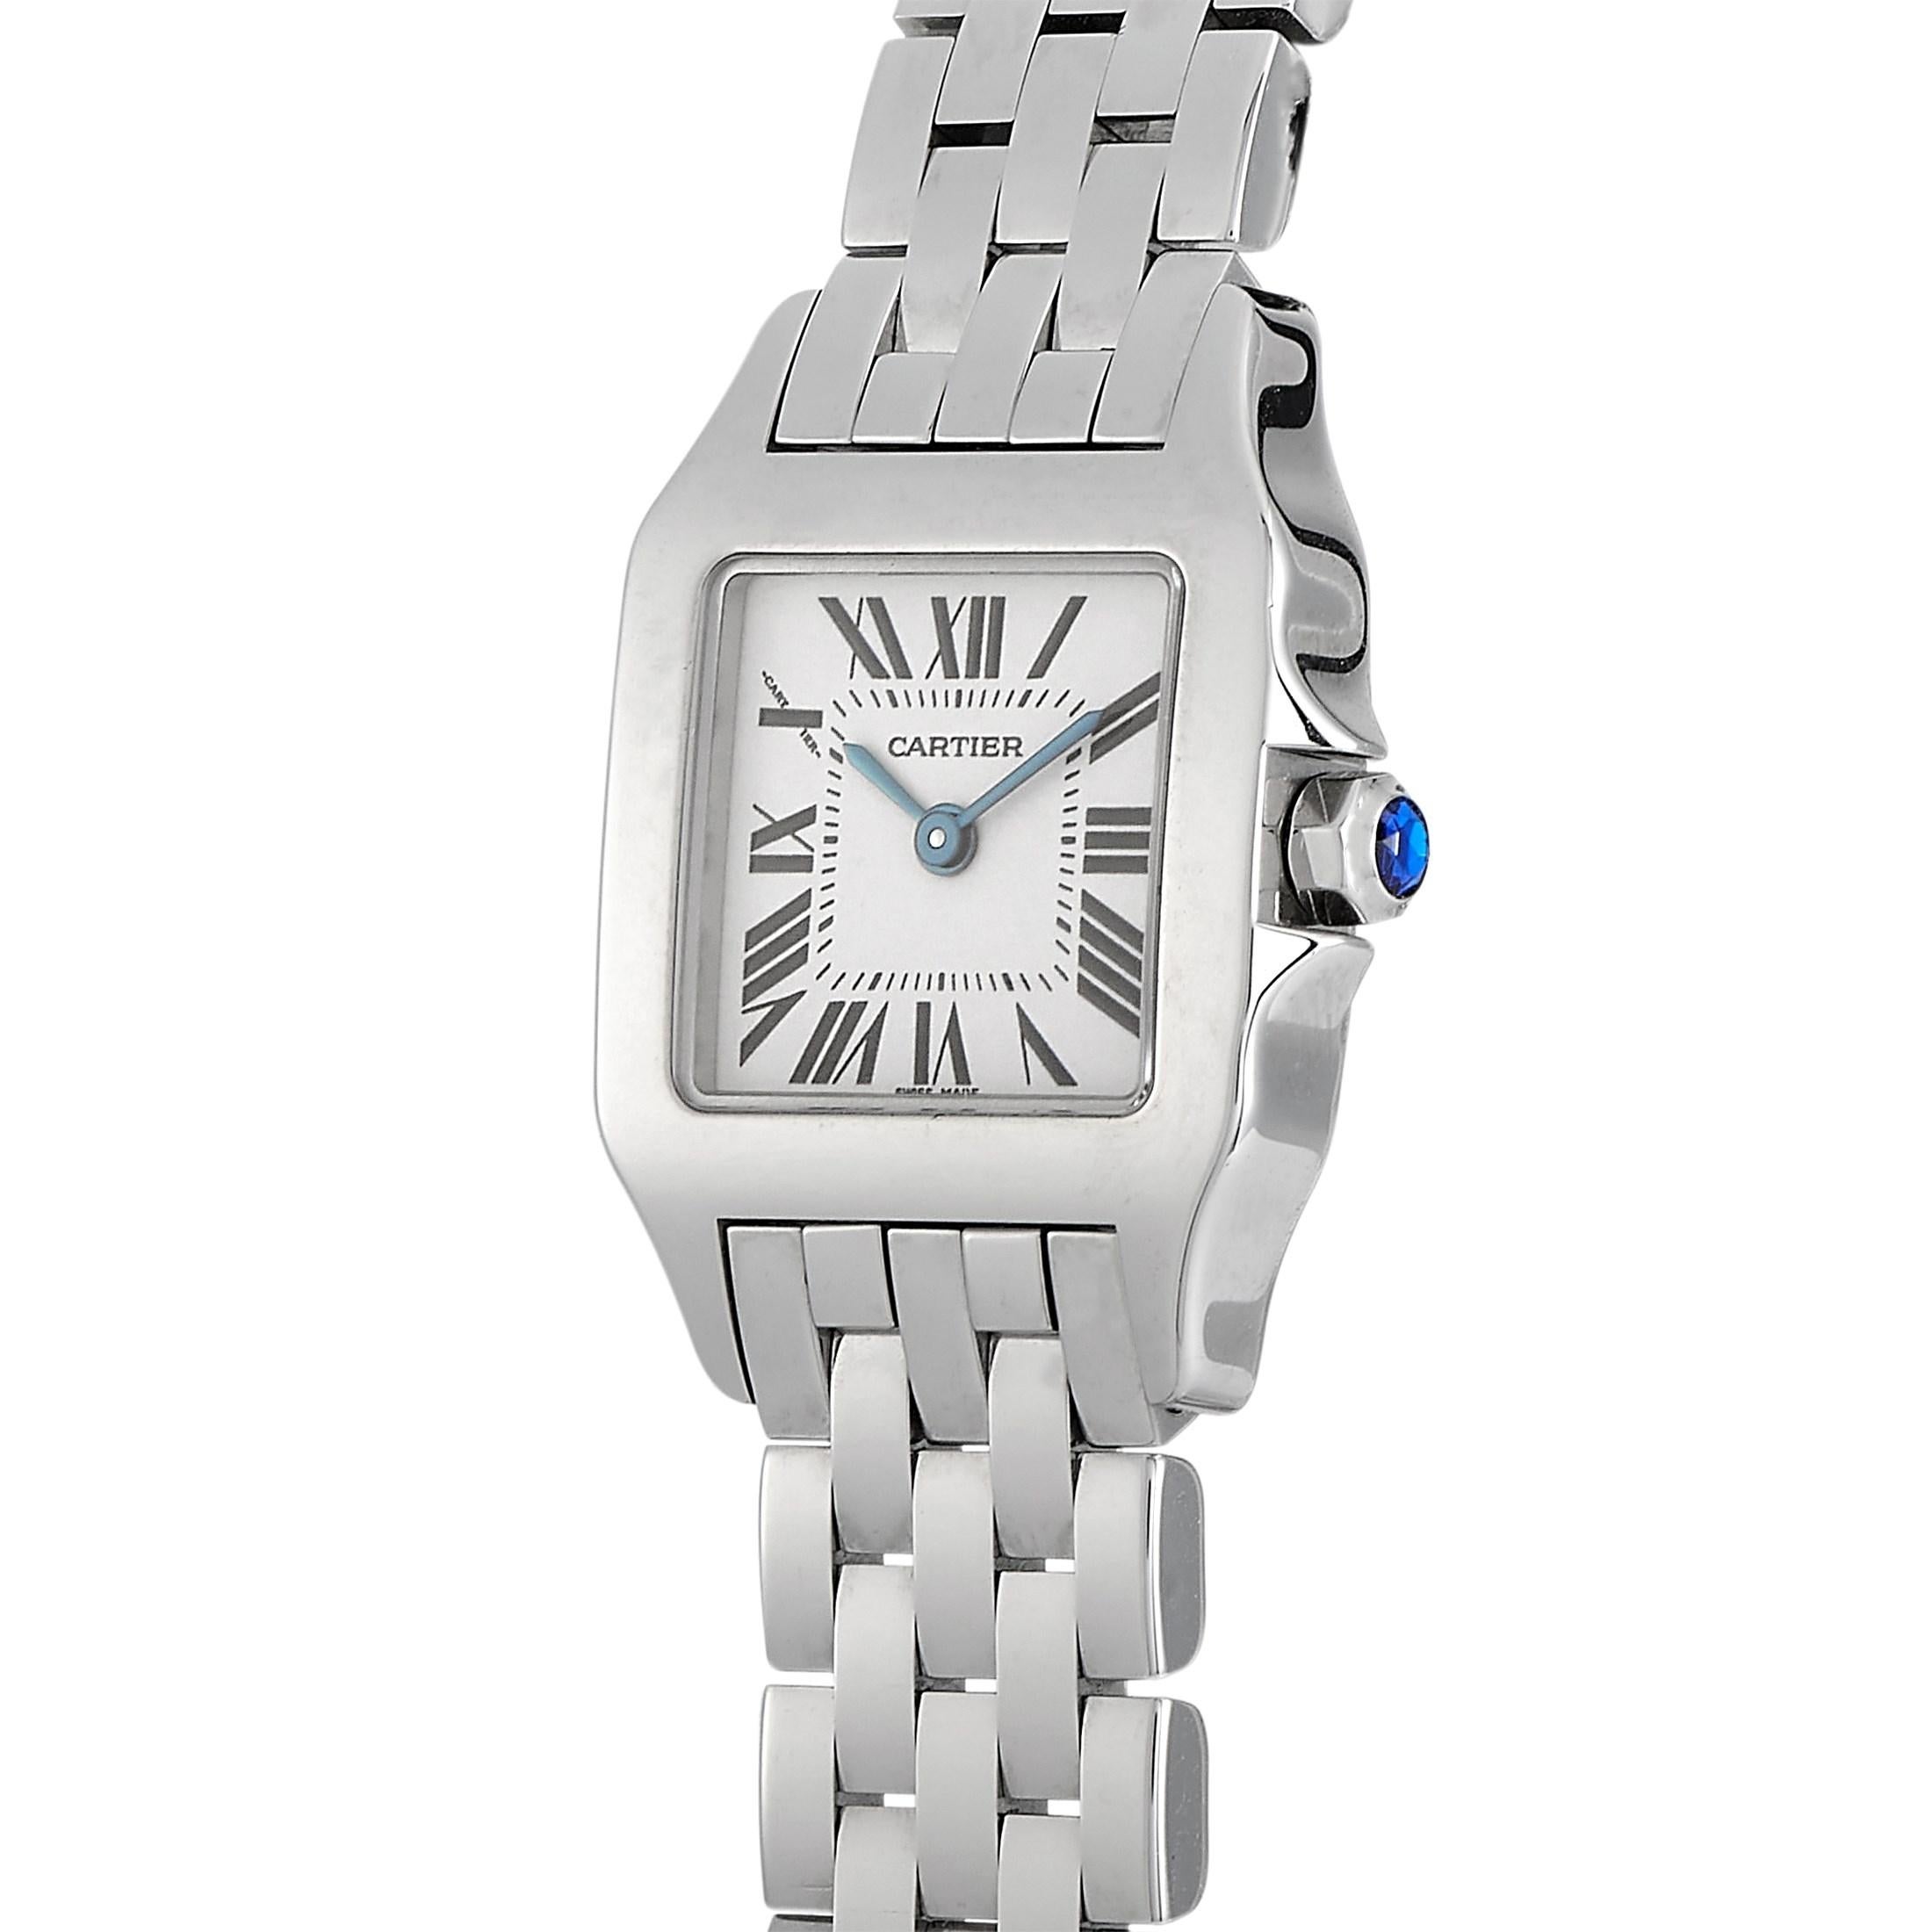 The Cartier Santos Demoiselle Watch, reference number 2698, is a chic ladies timepiece that will never go out of style. 

An evergreen addition to any woman’s watch collection, this Cartier watch features a 20mm case and bracelet crafted from